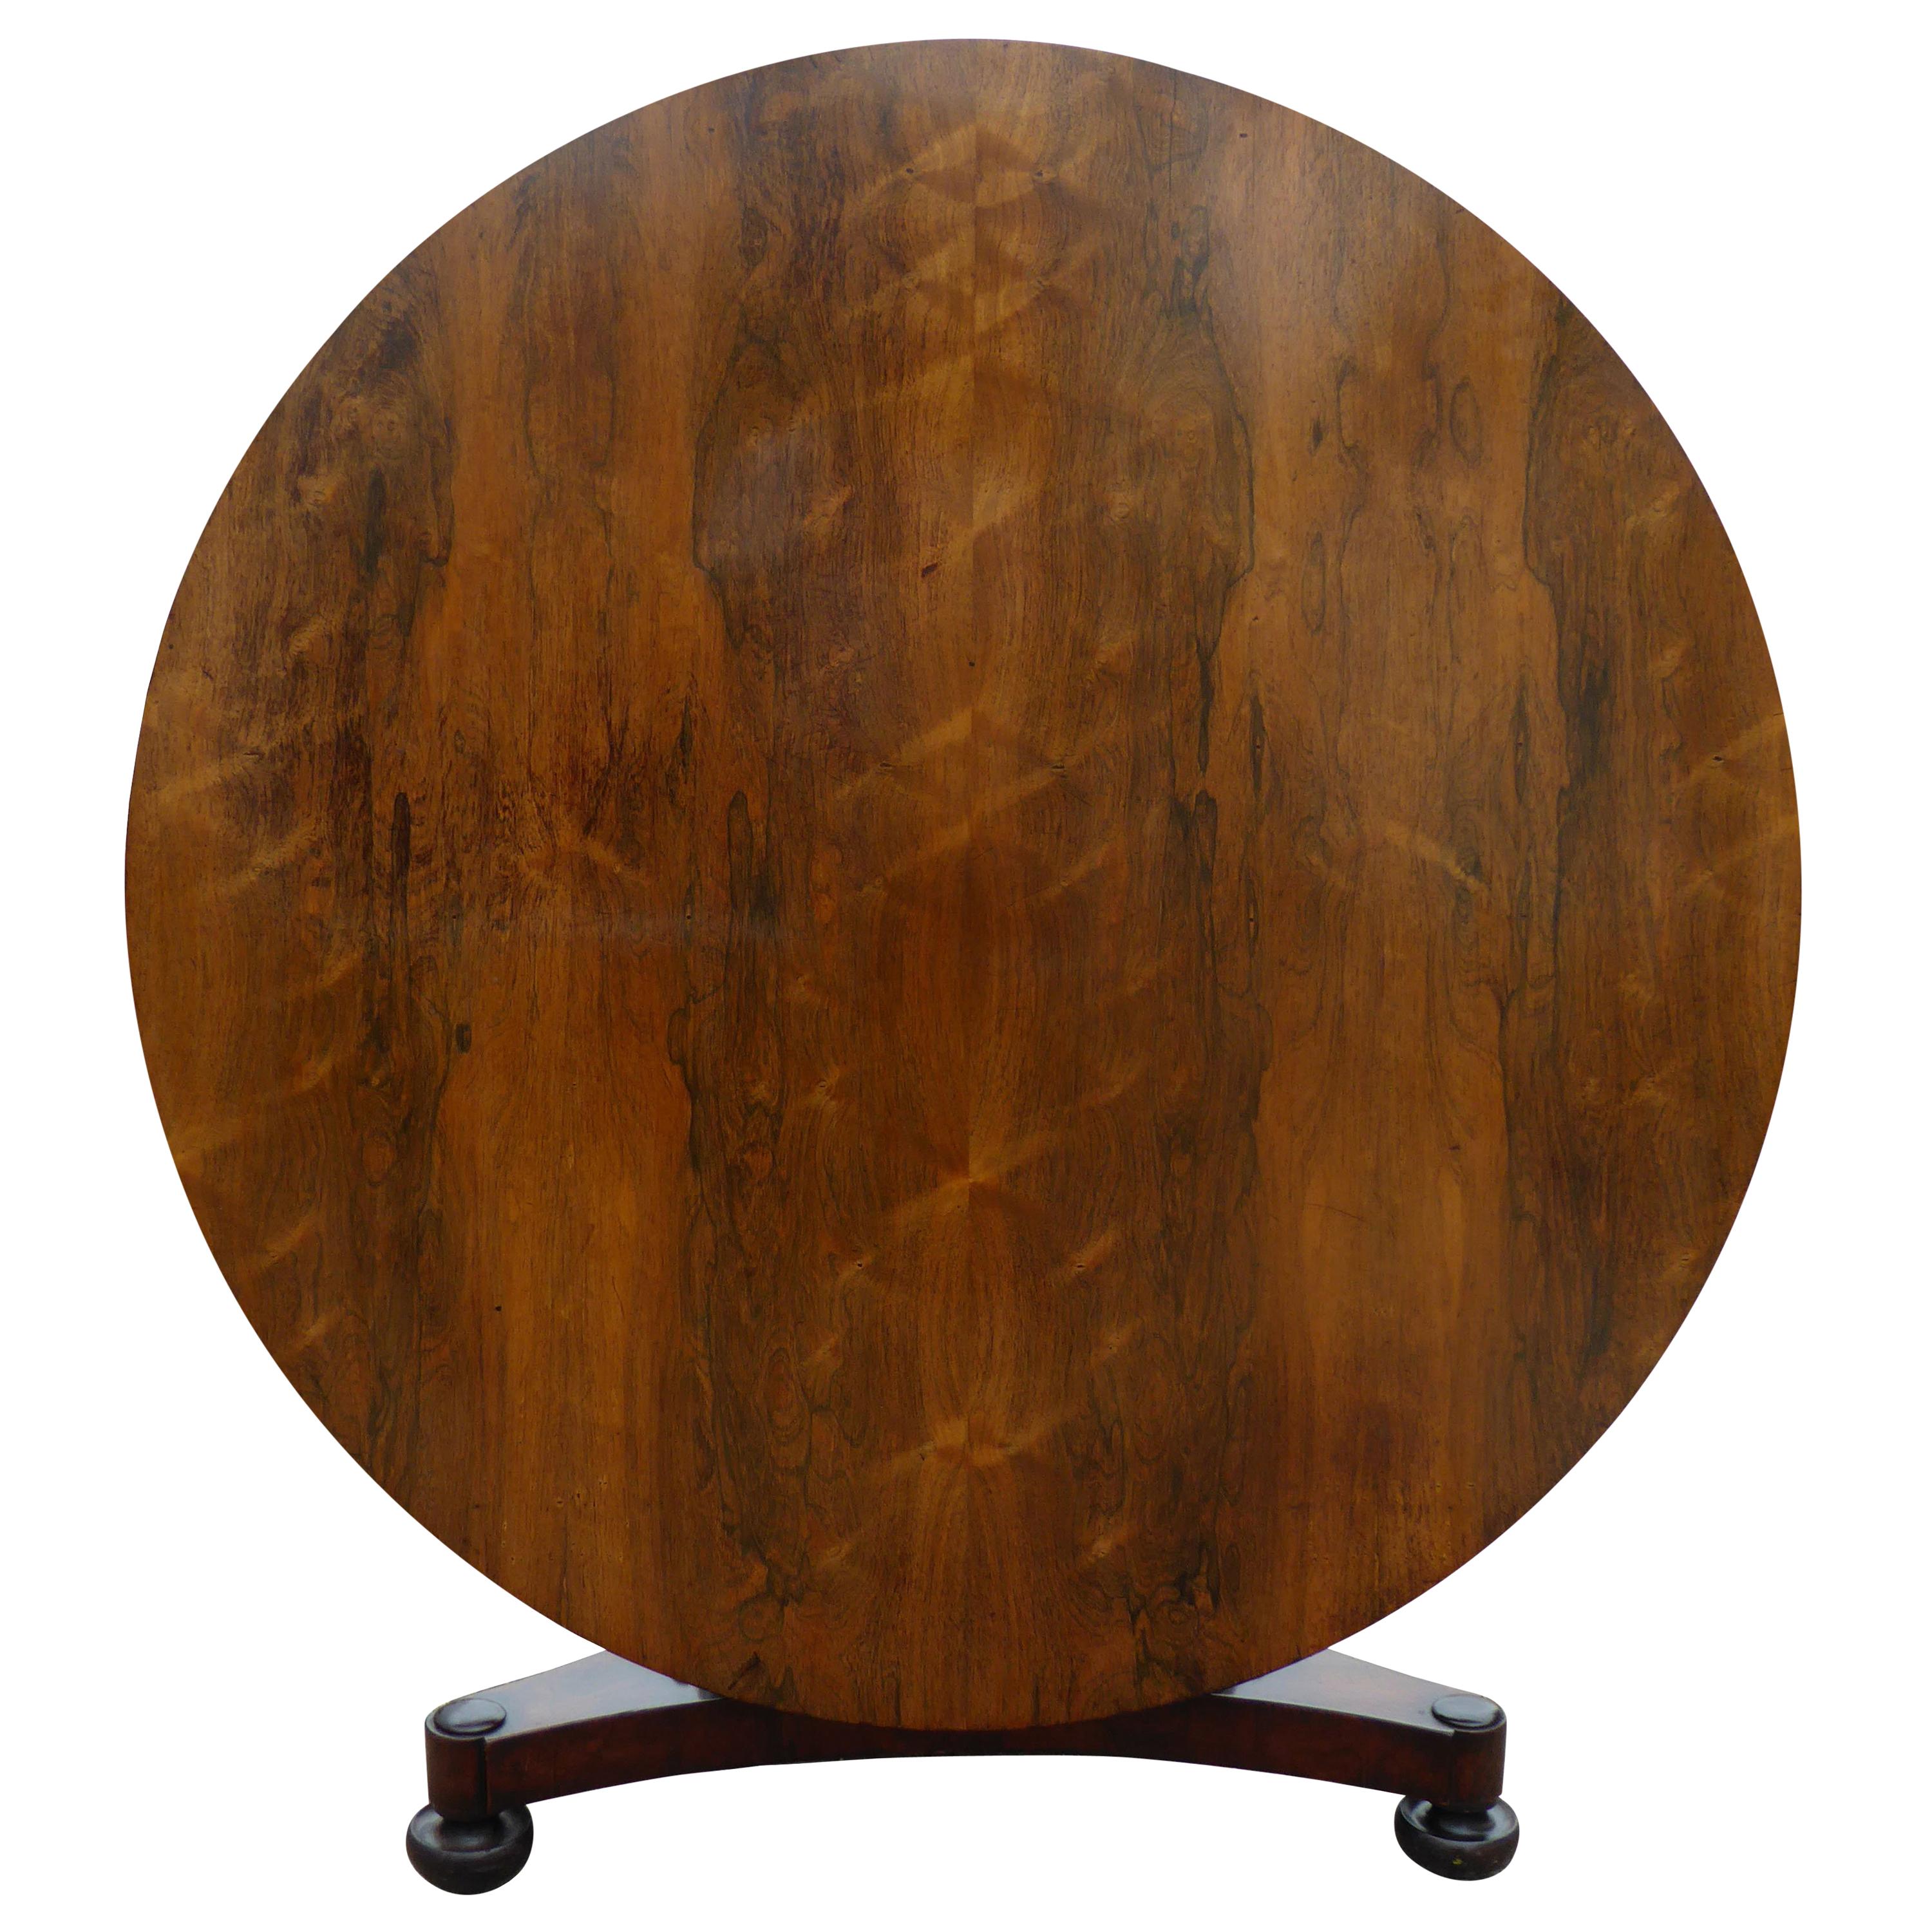 19th Century Regency Period Rosewood Round Dining Table